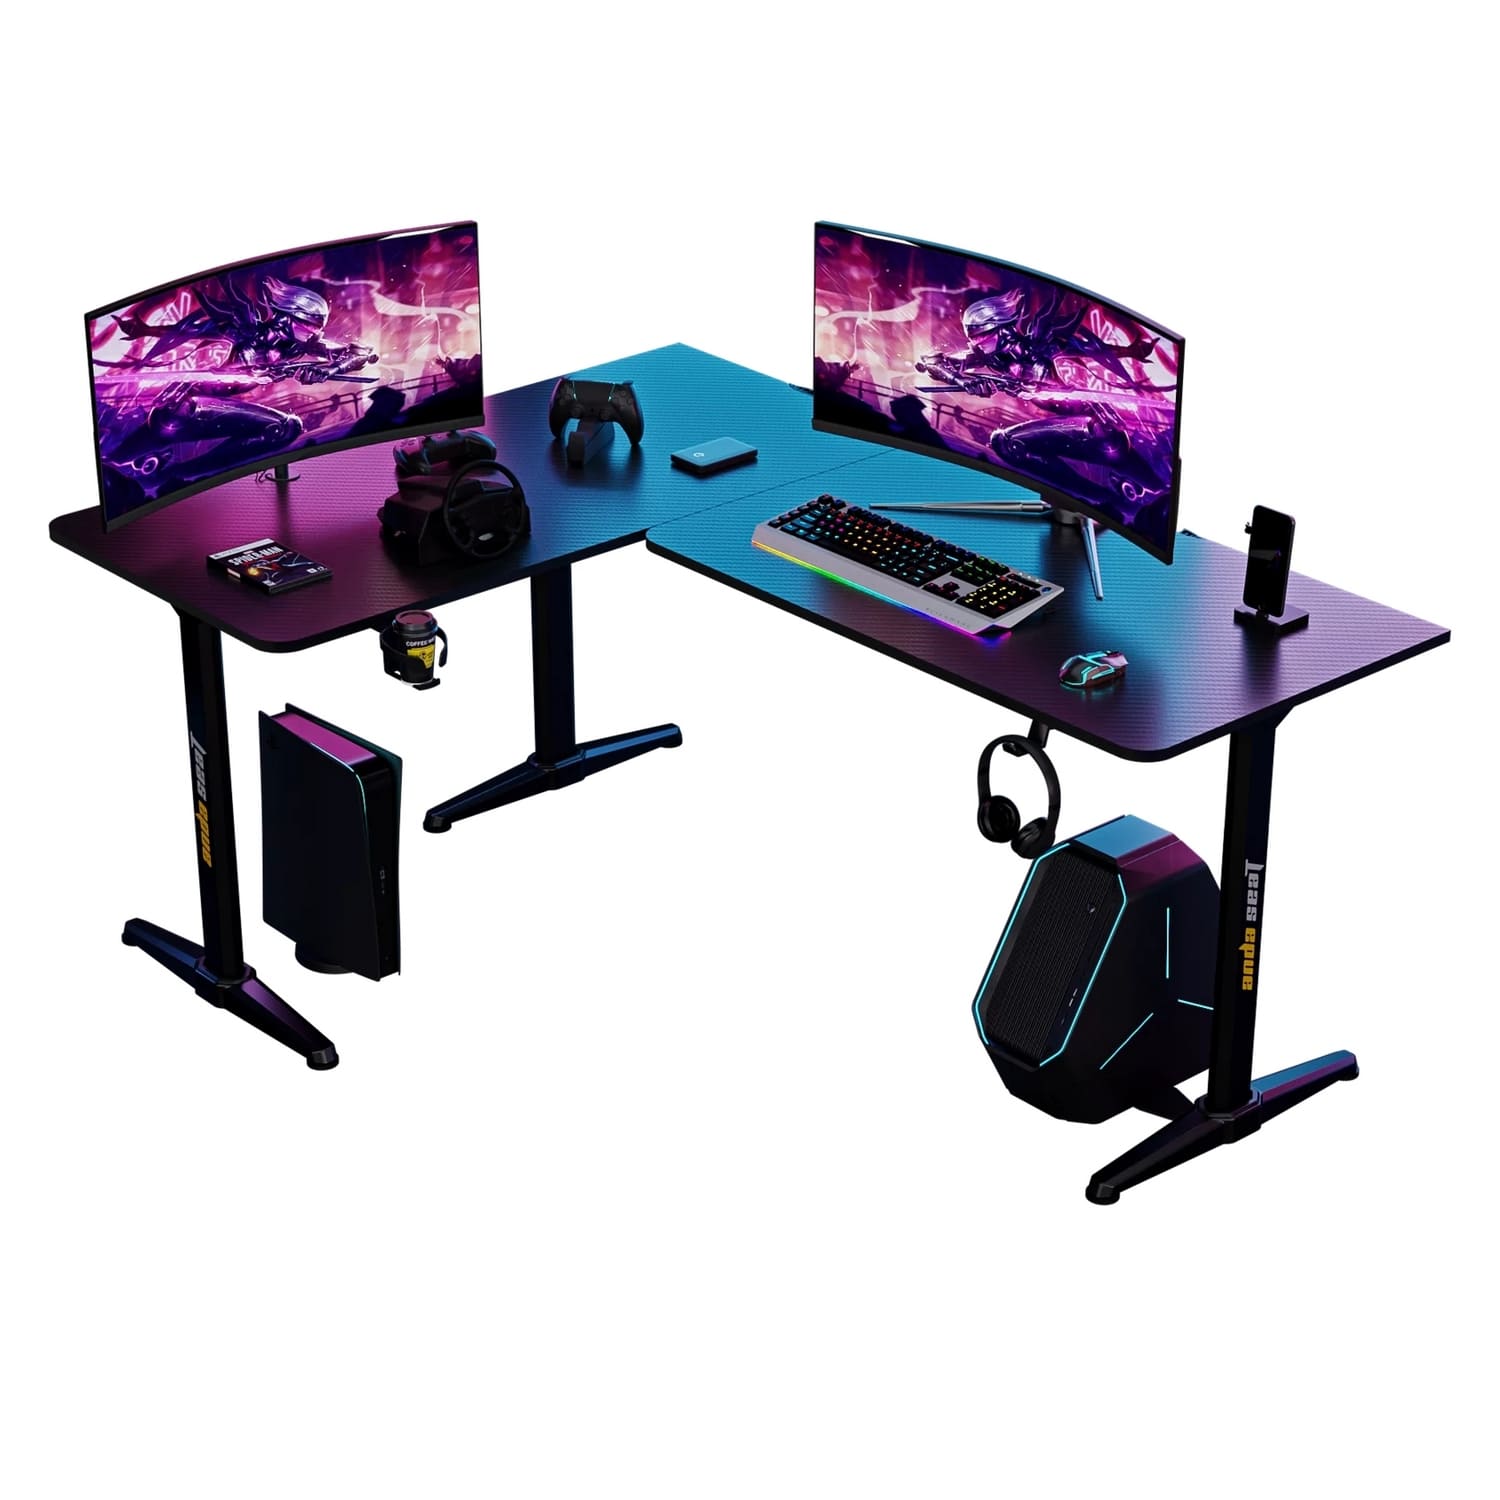 Epicenter of Virtual Adventures Gaming Table: Harmony of Style, Comfort and Efficiency!